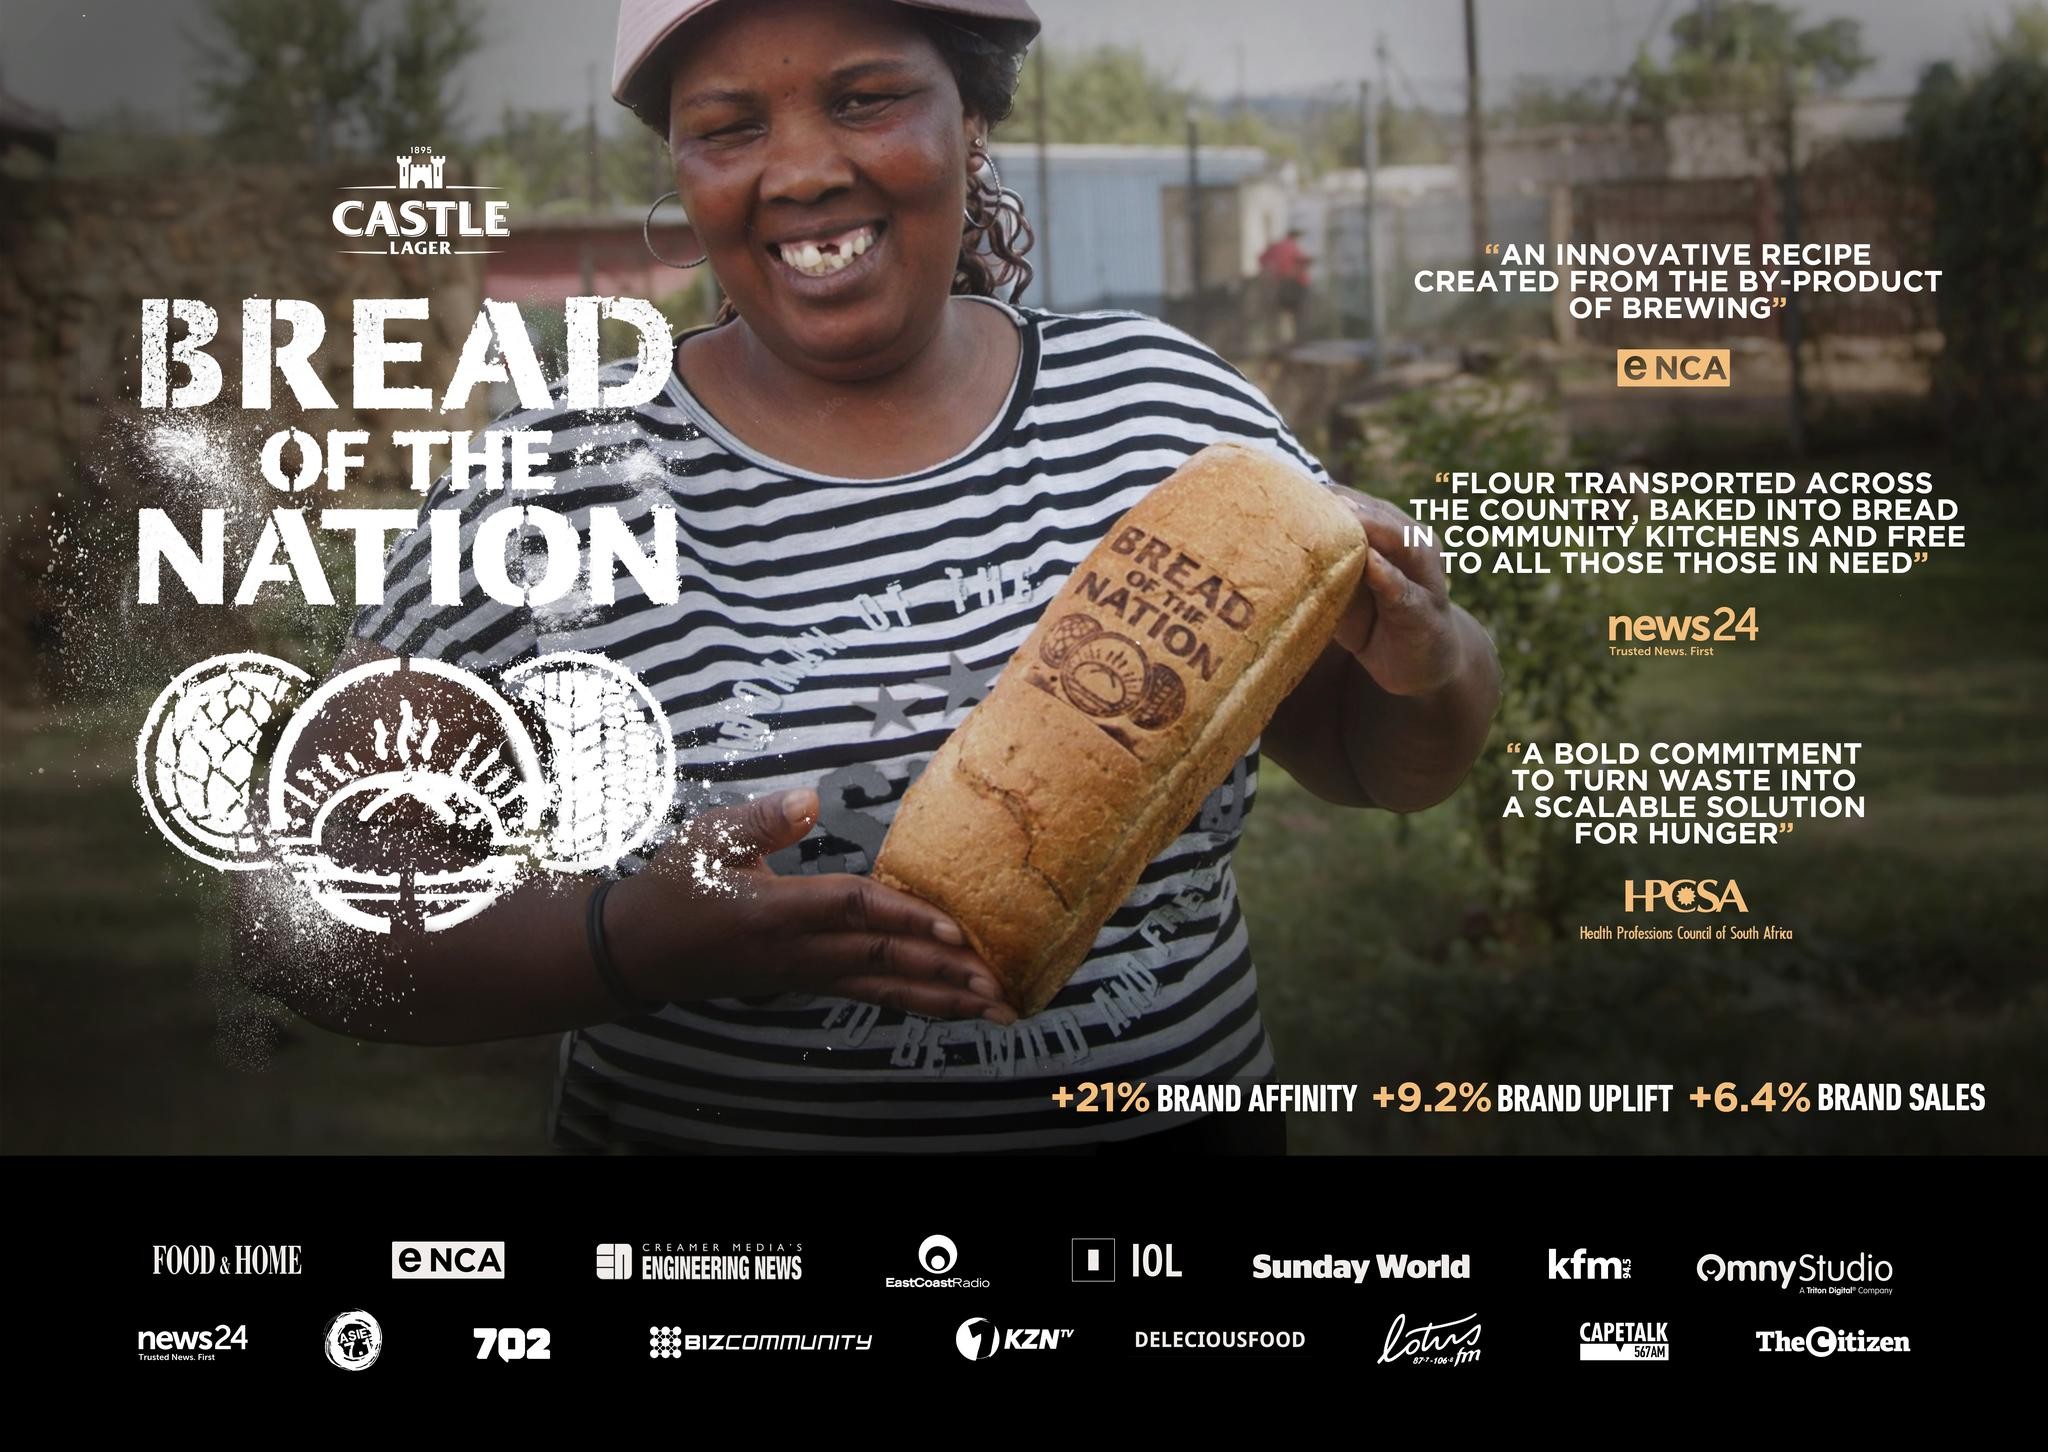 BREAD OF THE NATION